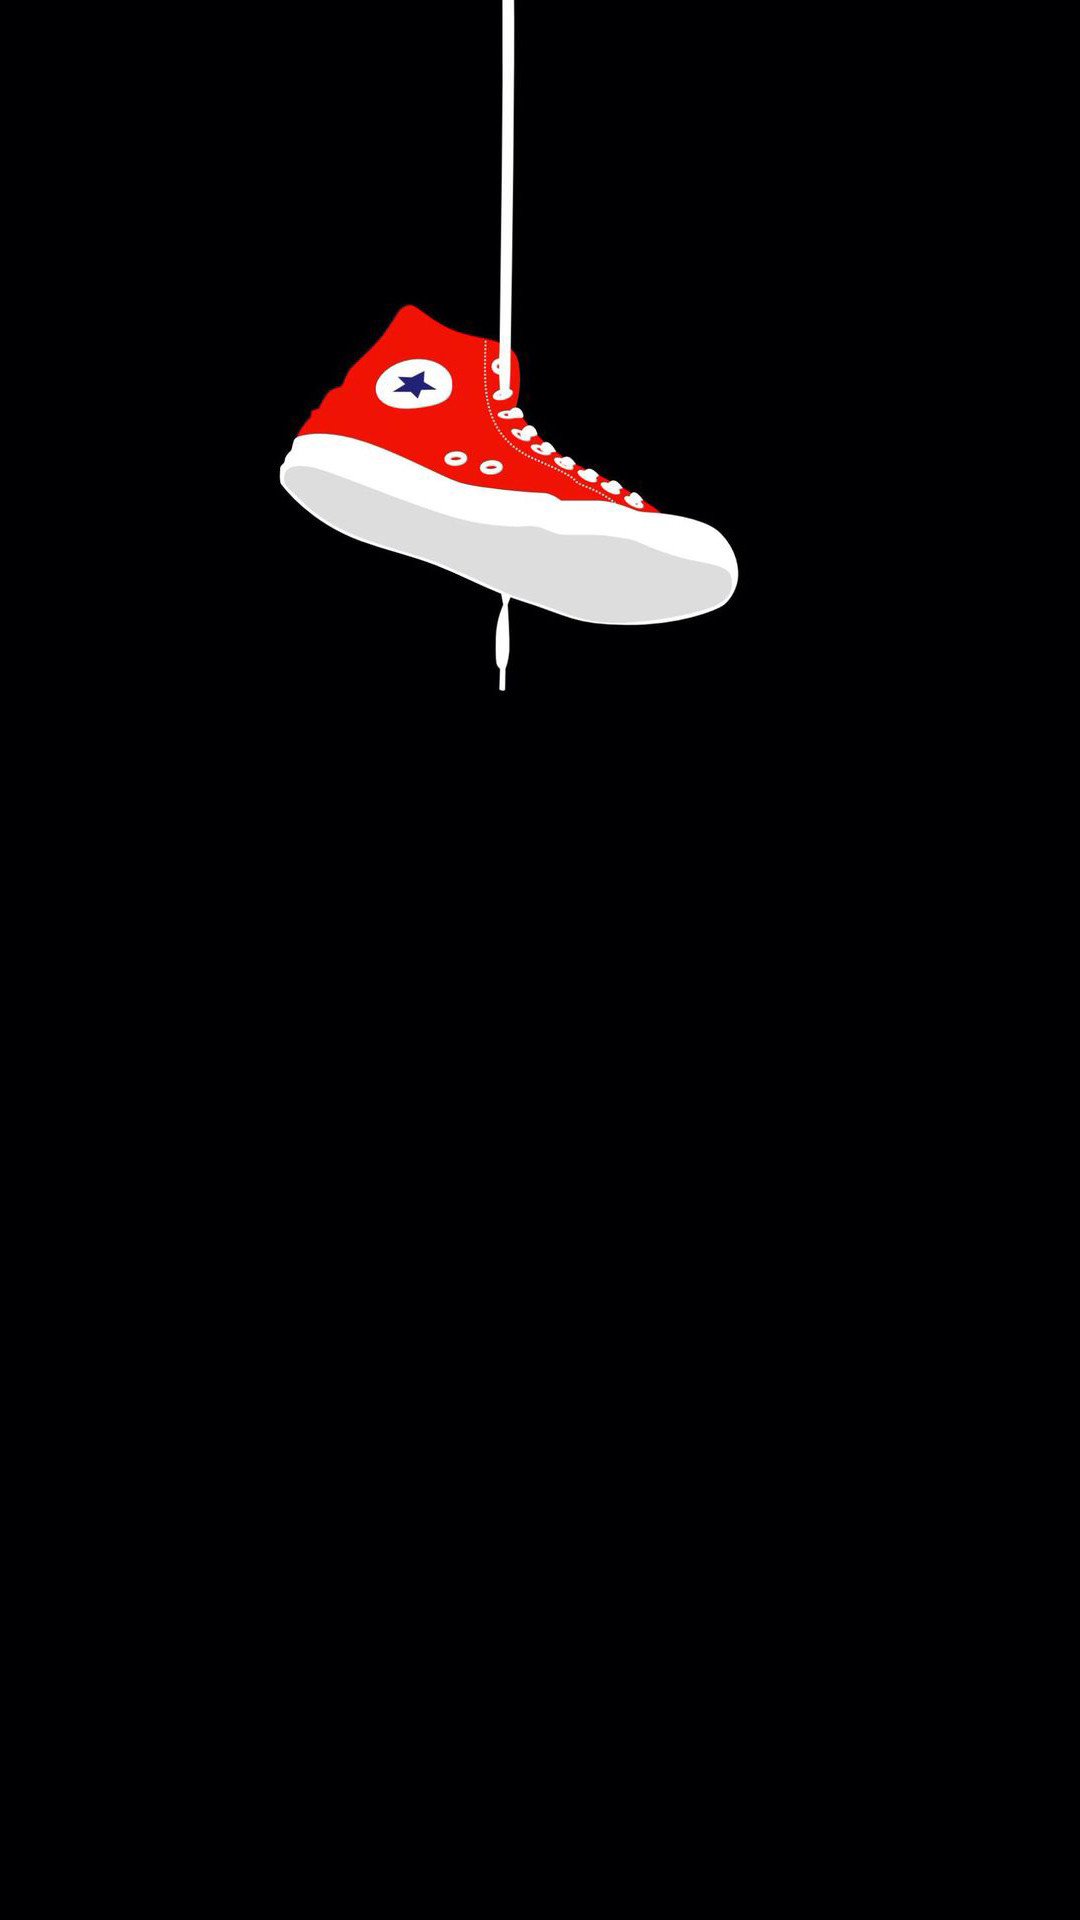 1080x1920 Converse Sneaker Hanging Wallpaper For iPhone 6 and 6 Plus